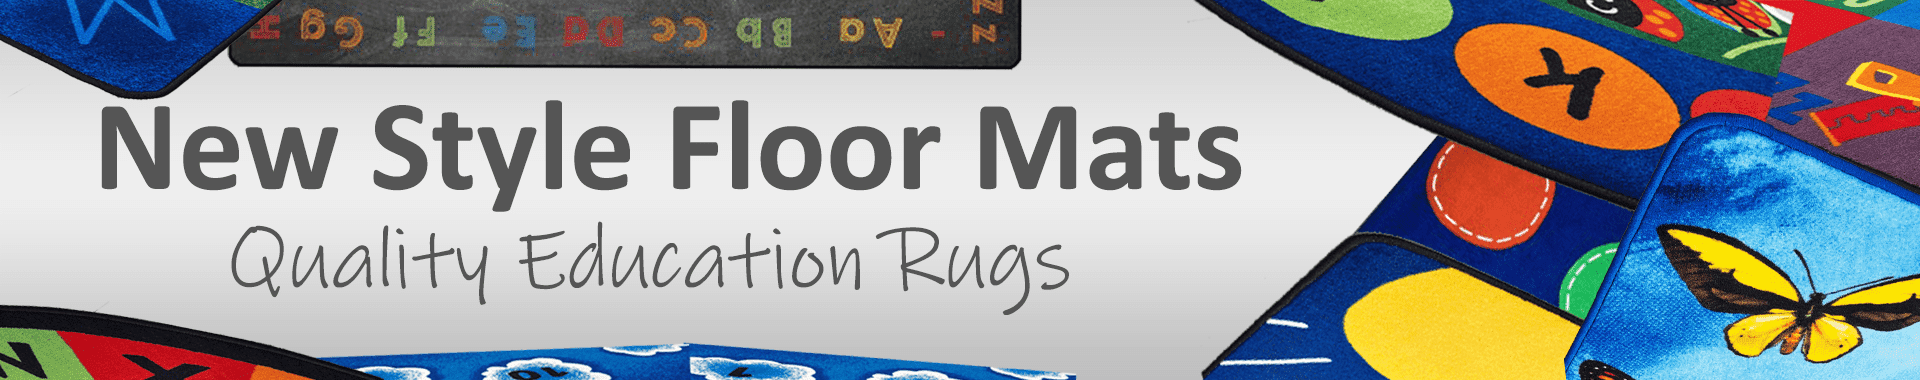 Quality Education Rugs New Style Floor Mats